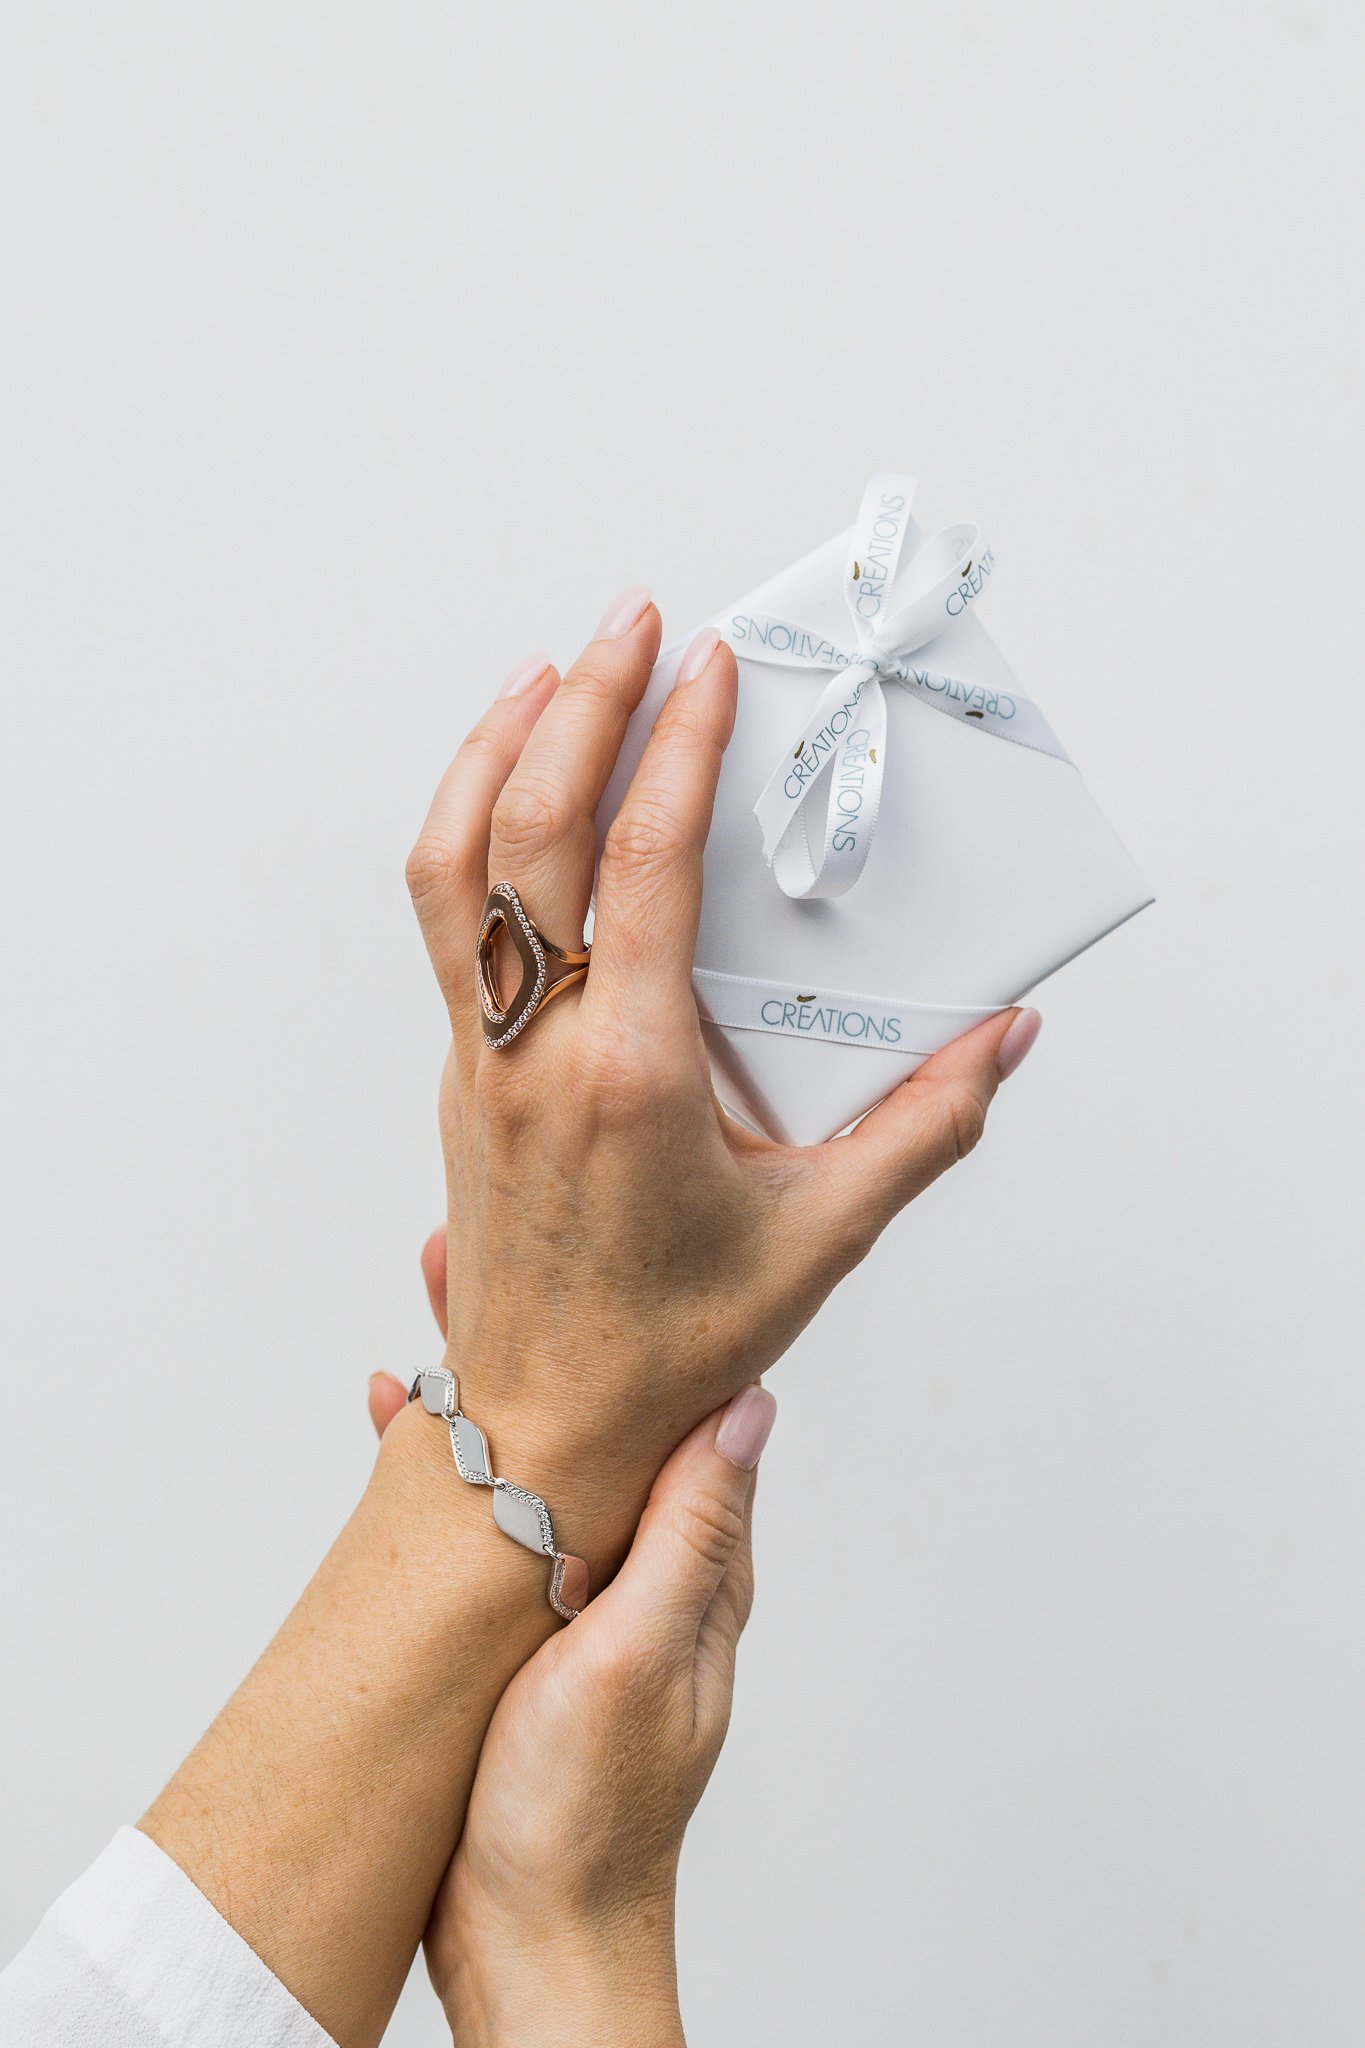 Canberra product photographer - female hands hold gift box